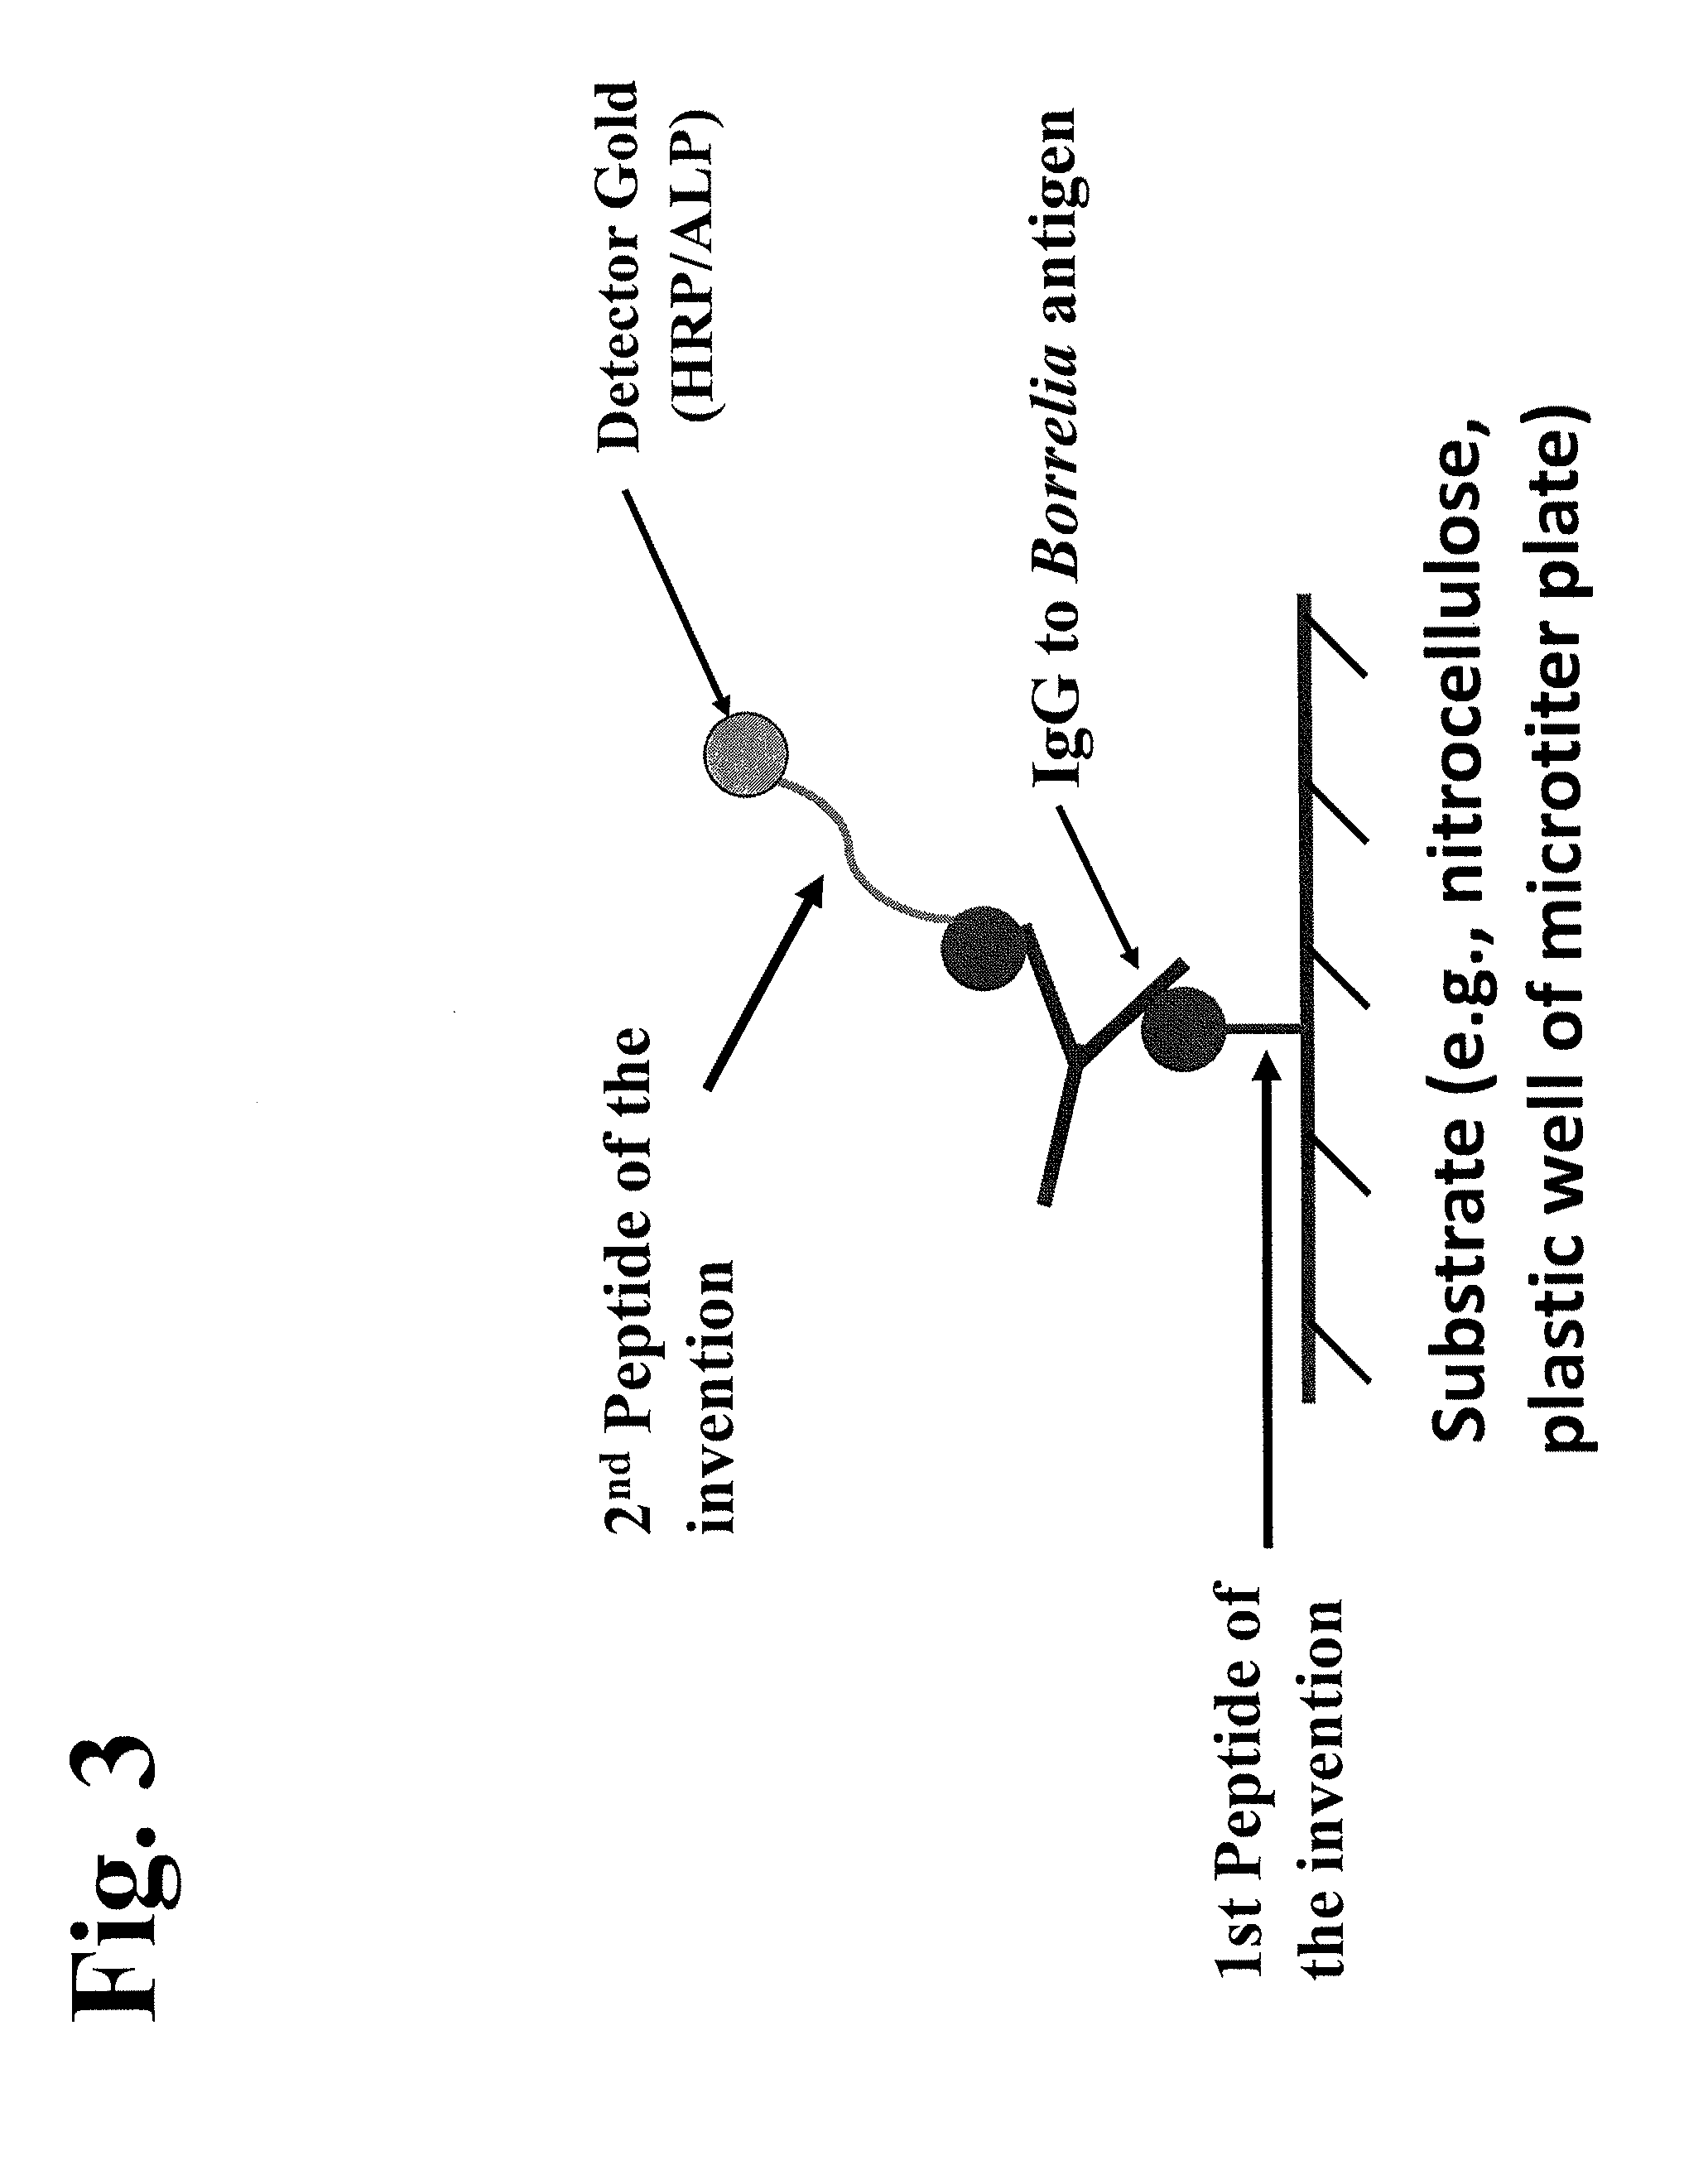 Peptides and methods for the detection of Lyme disease antibodies